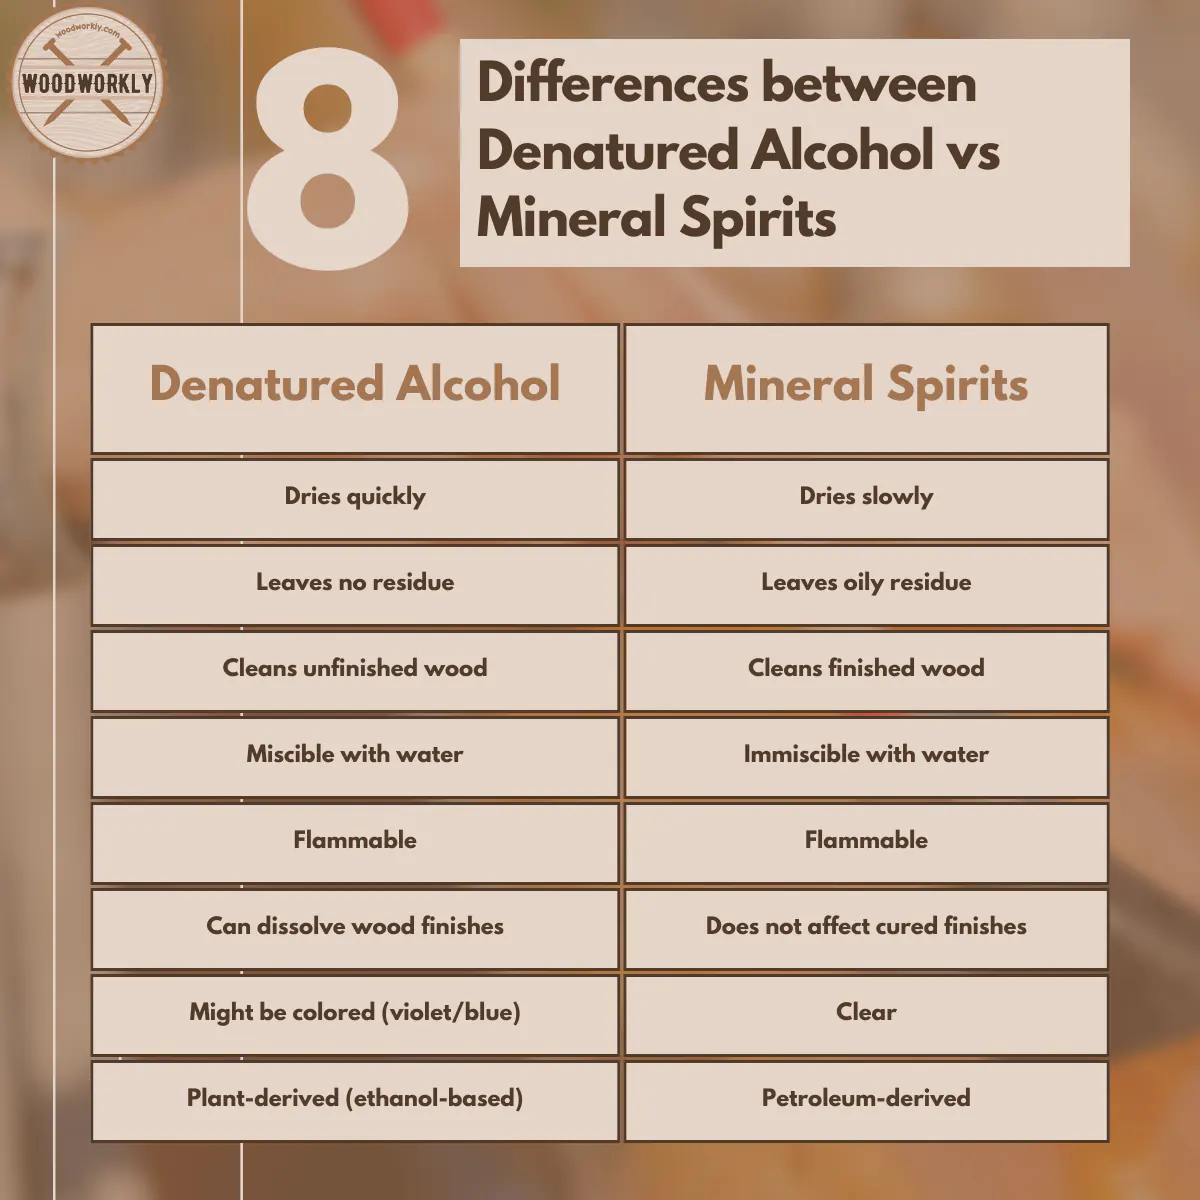 Differences between Denatured Alcohol vs Mineral Spirits